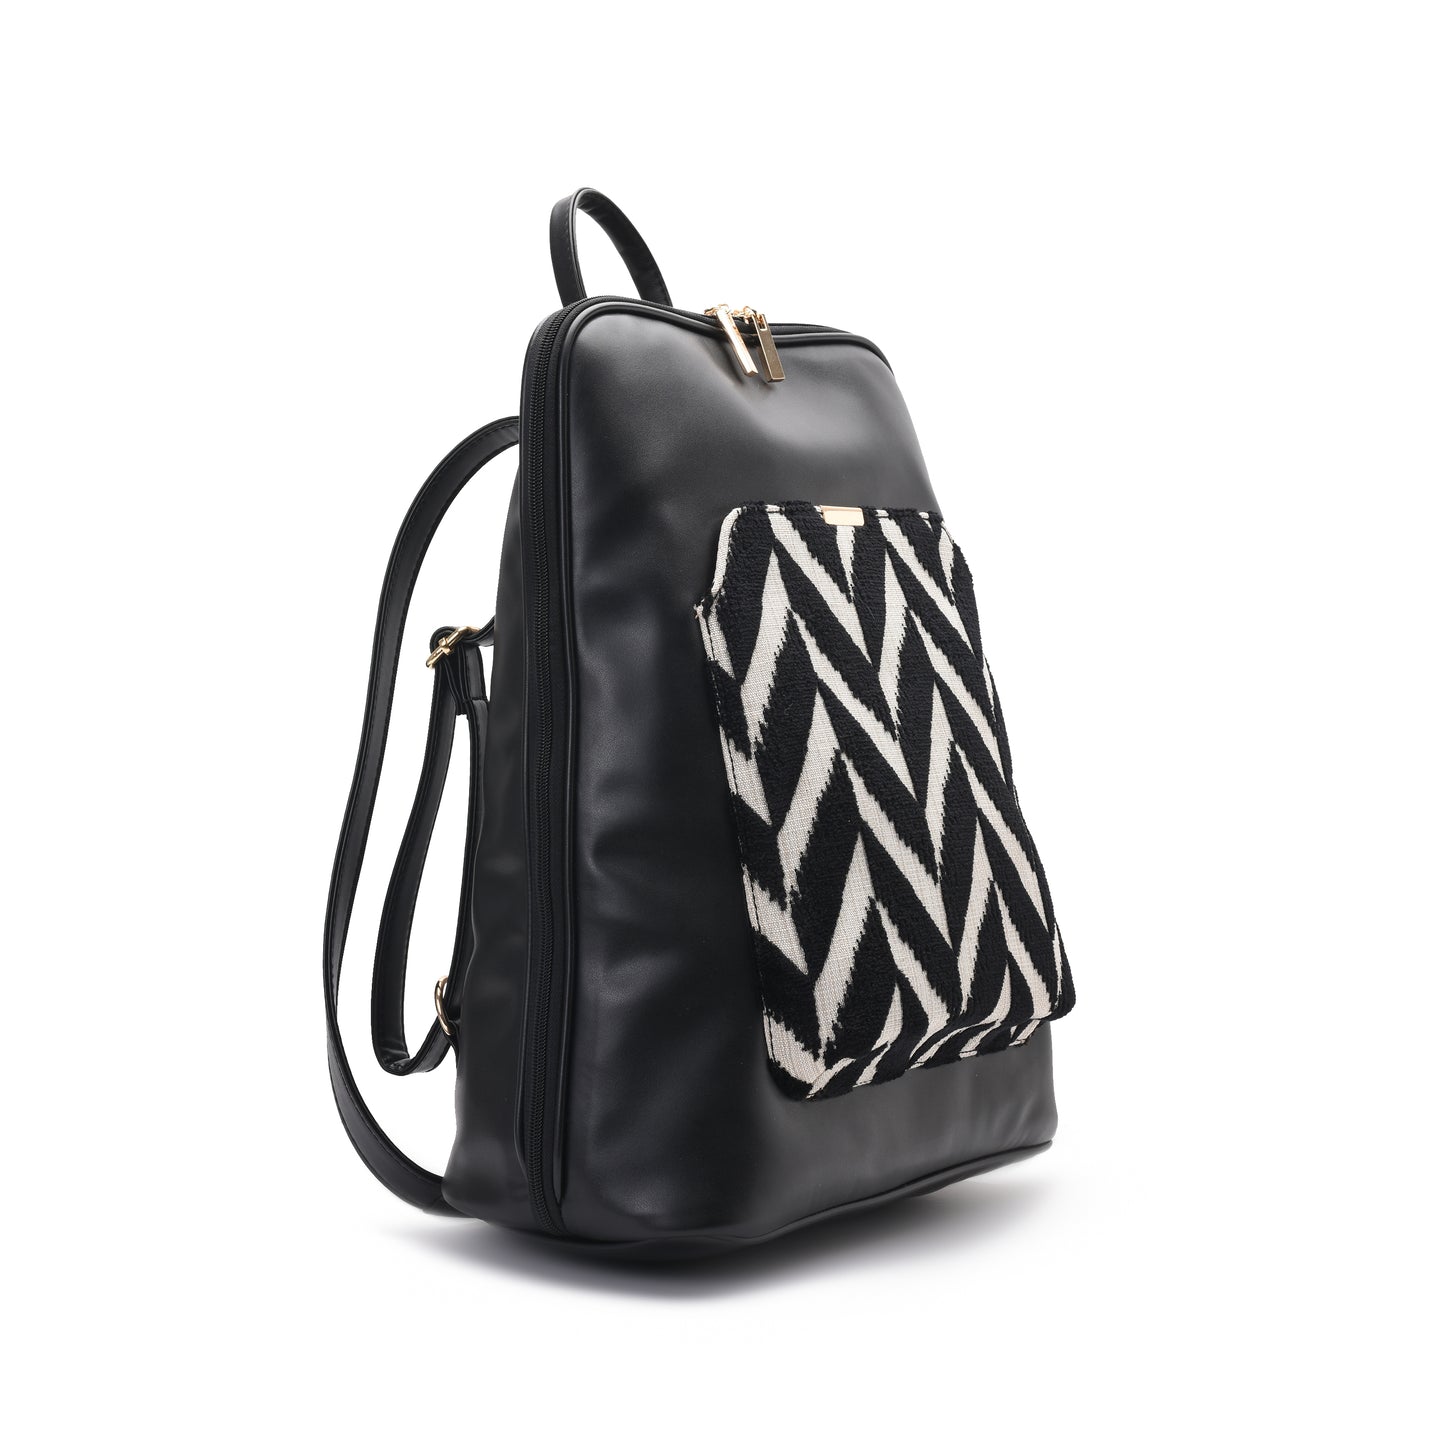 Laptop Black with Black and White fabric Backpack/Cross - Code 2000